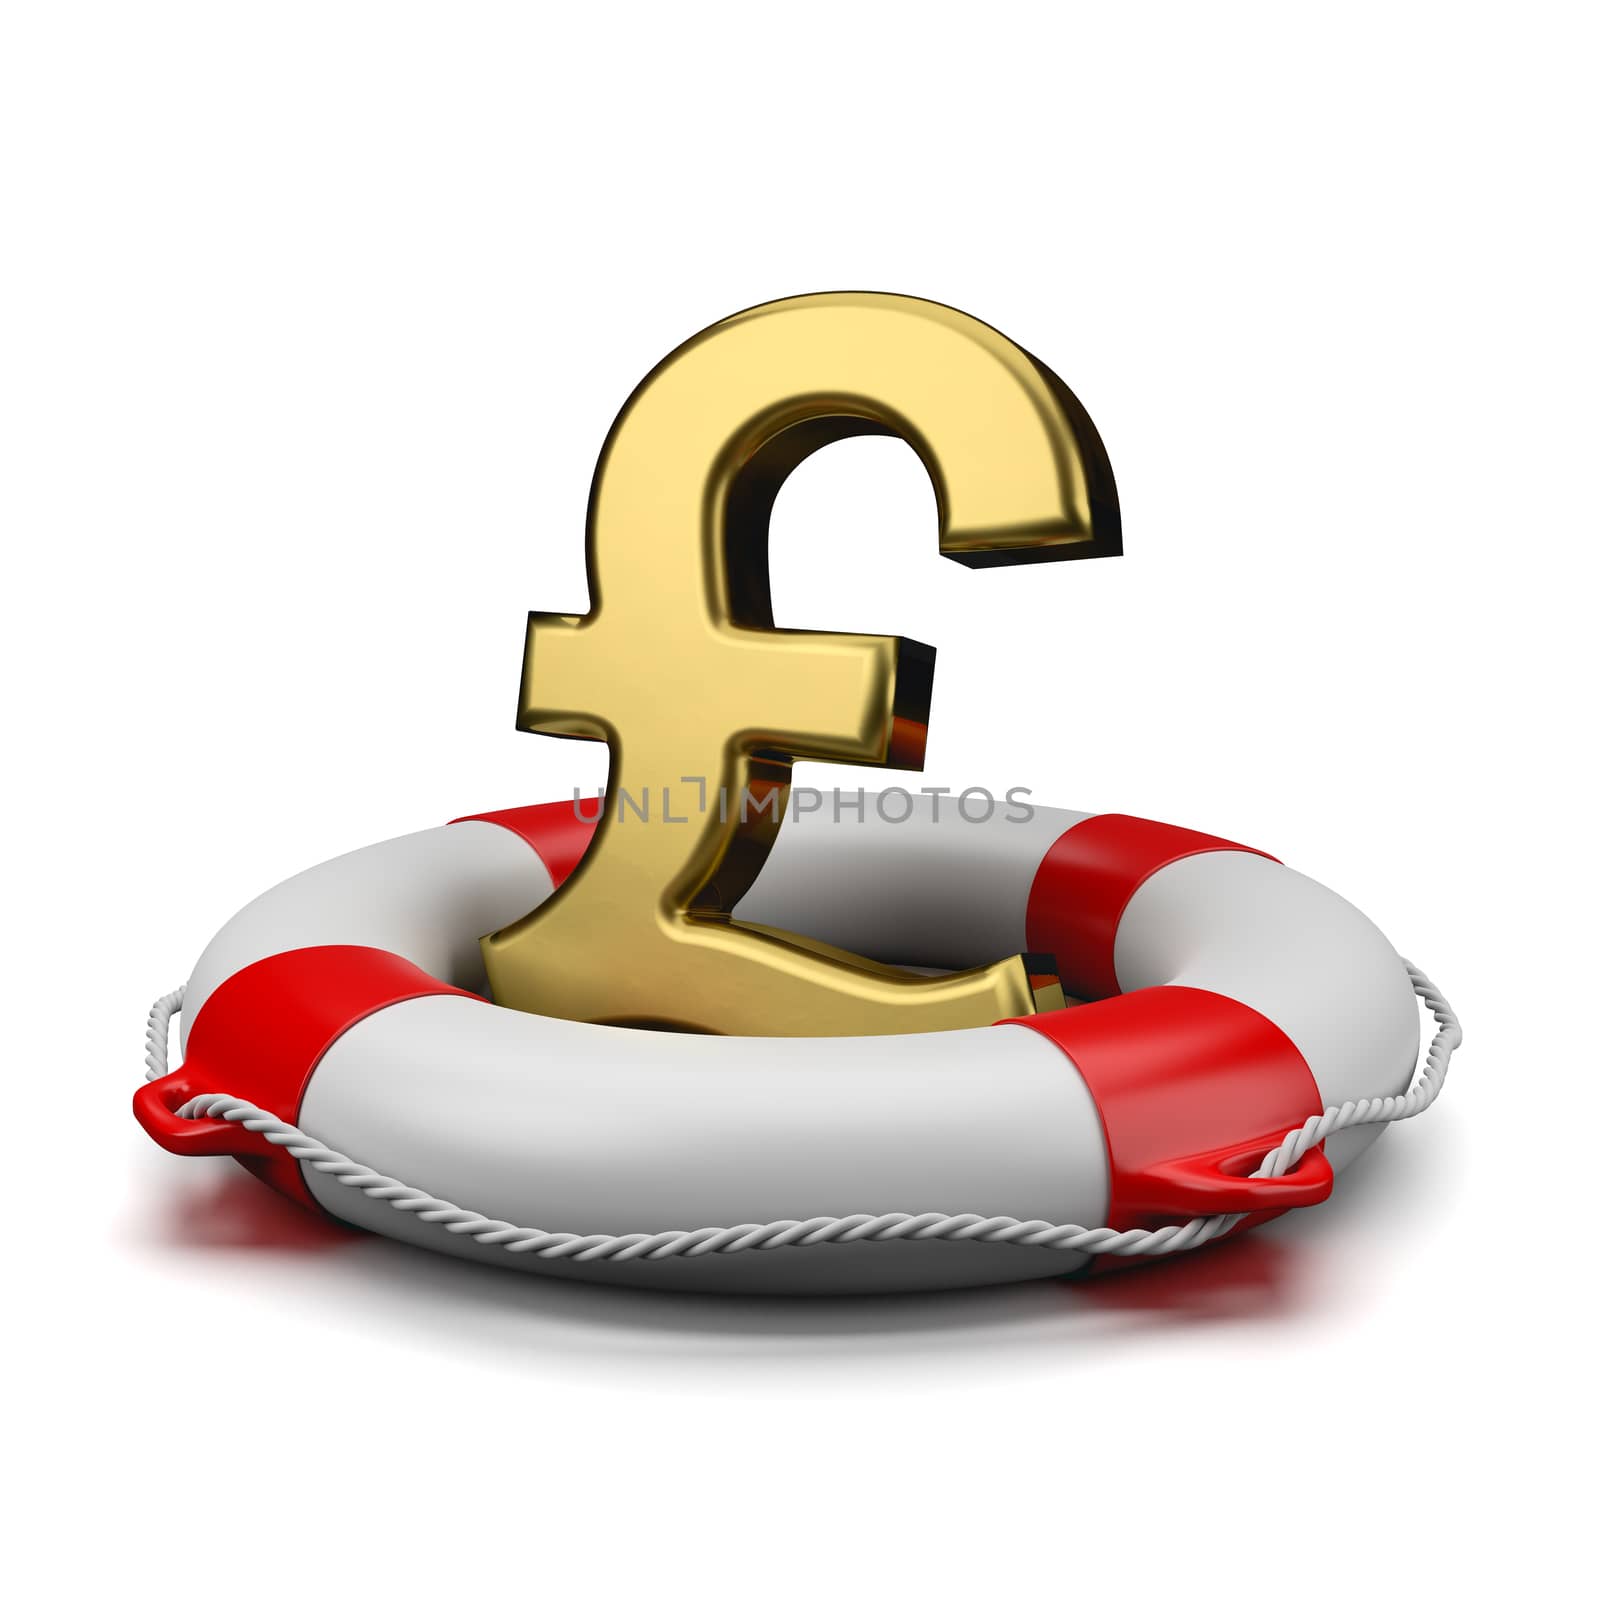 Pound British Currency Sign on a Lifebuoy by make